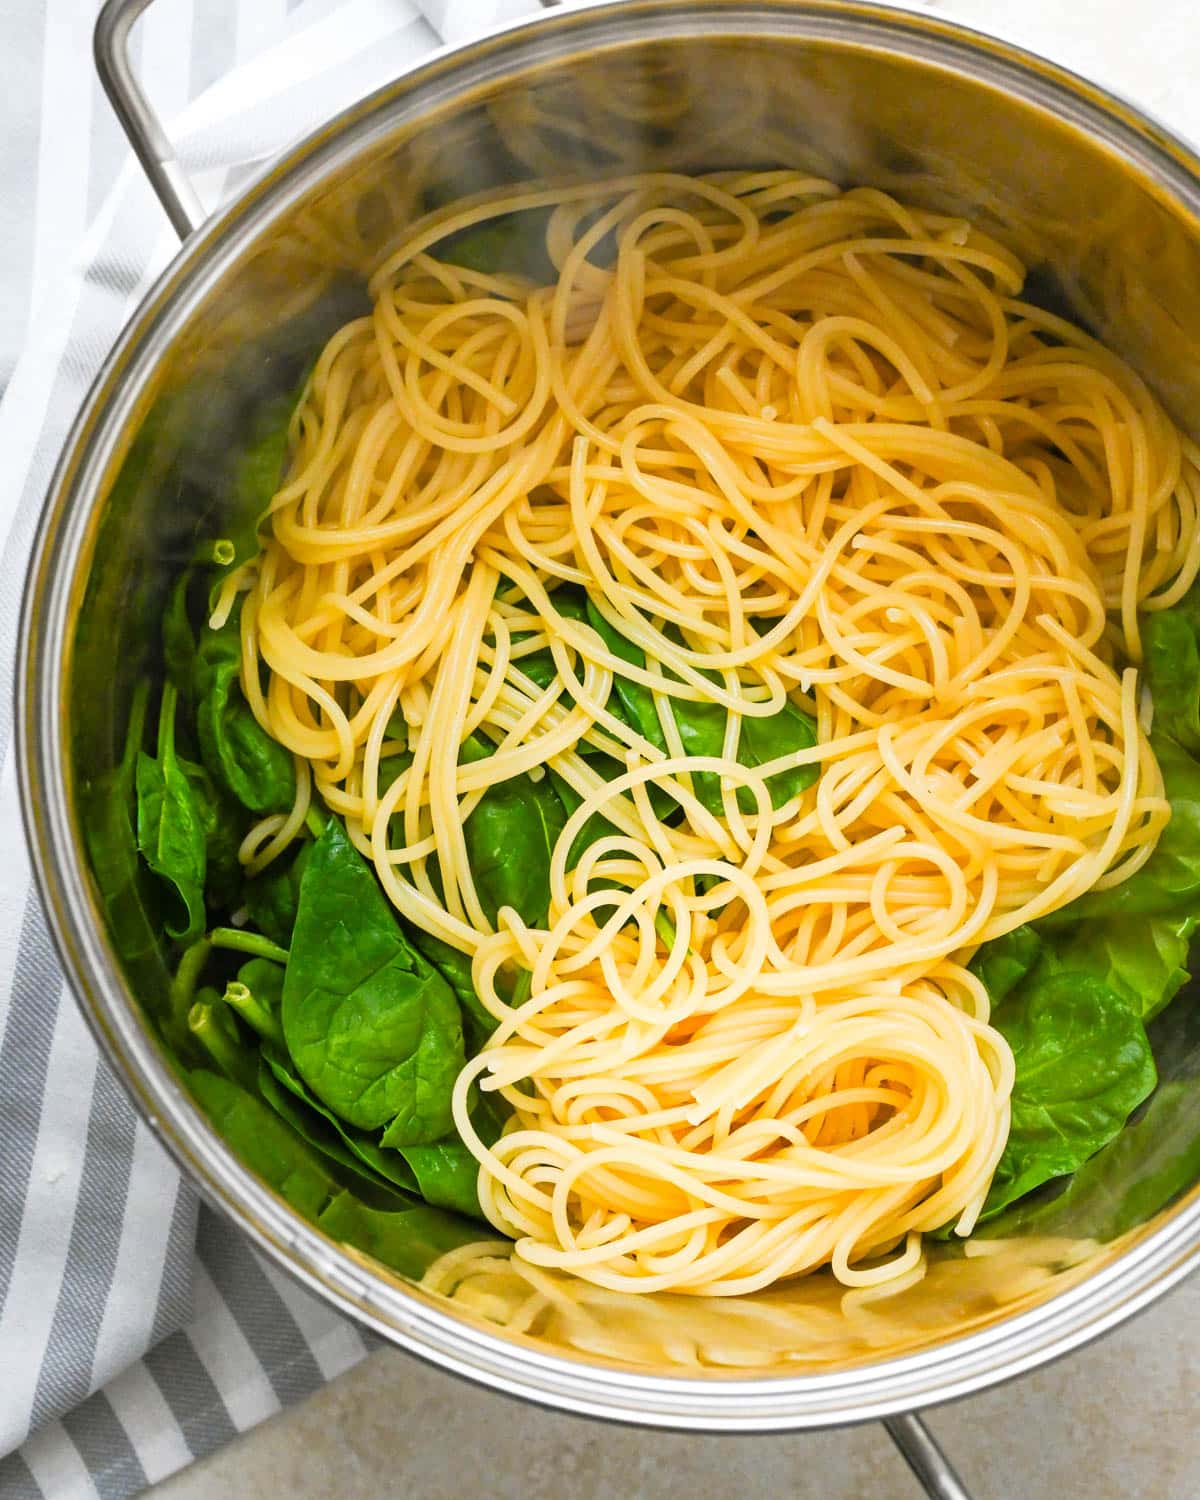 Tossing cooked spaghetti with fresh spinach to wilt it.